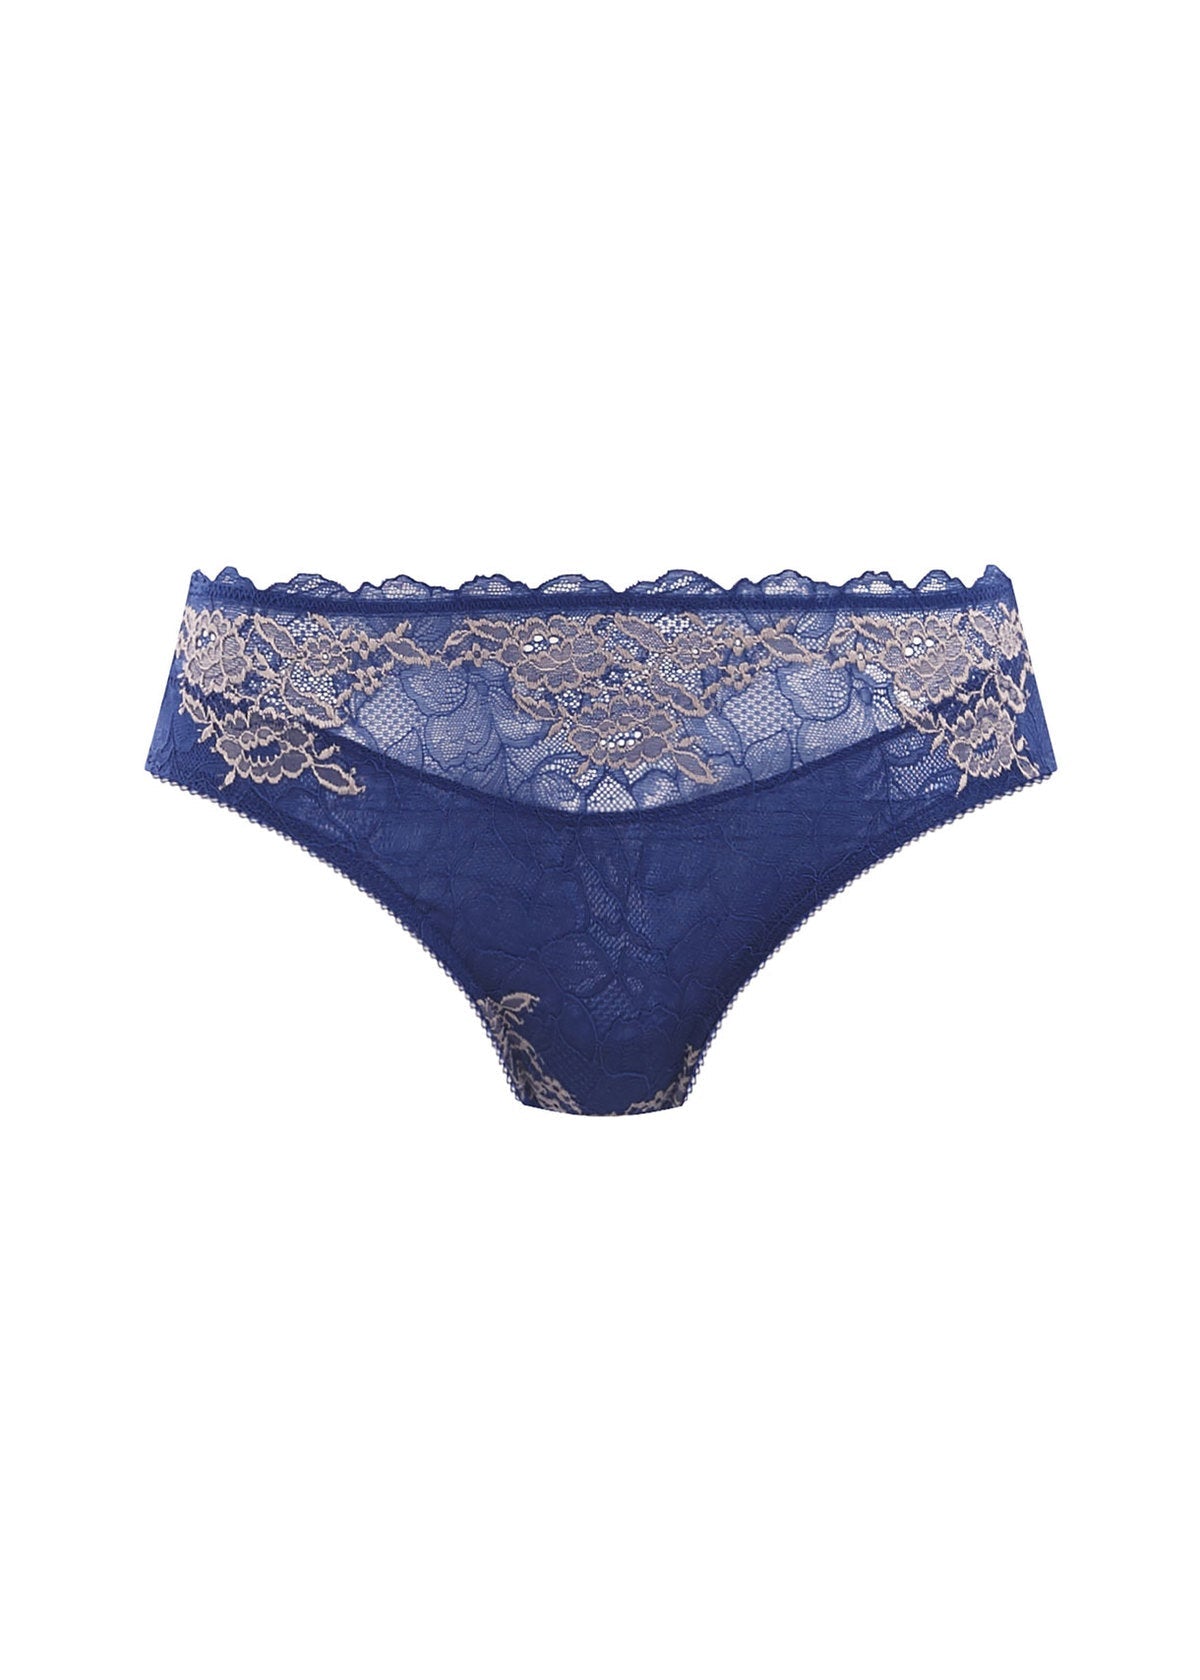 WACOAL Lace Perfection brief WE135005 - Sapphire & Pink